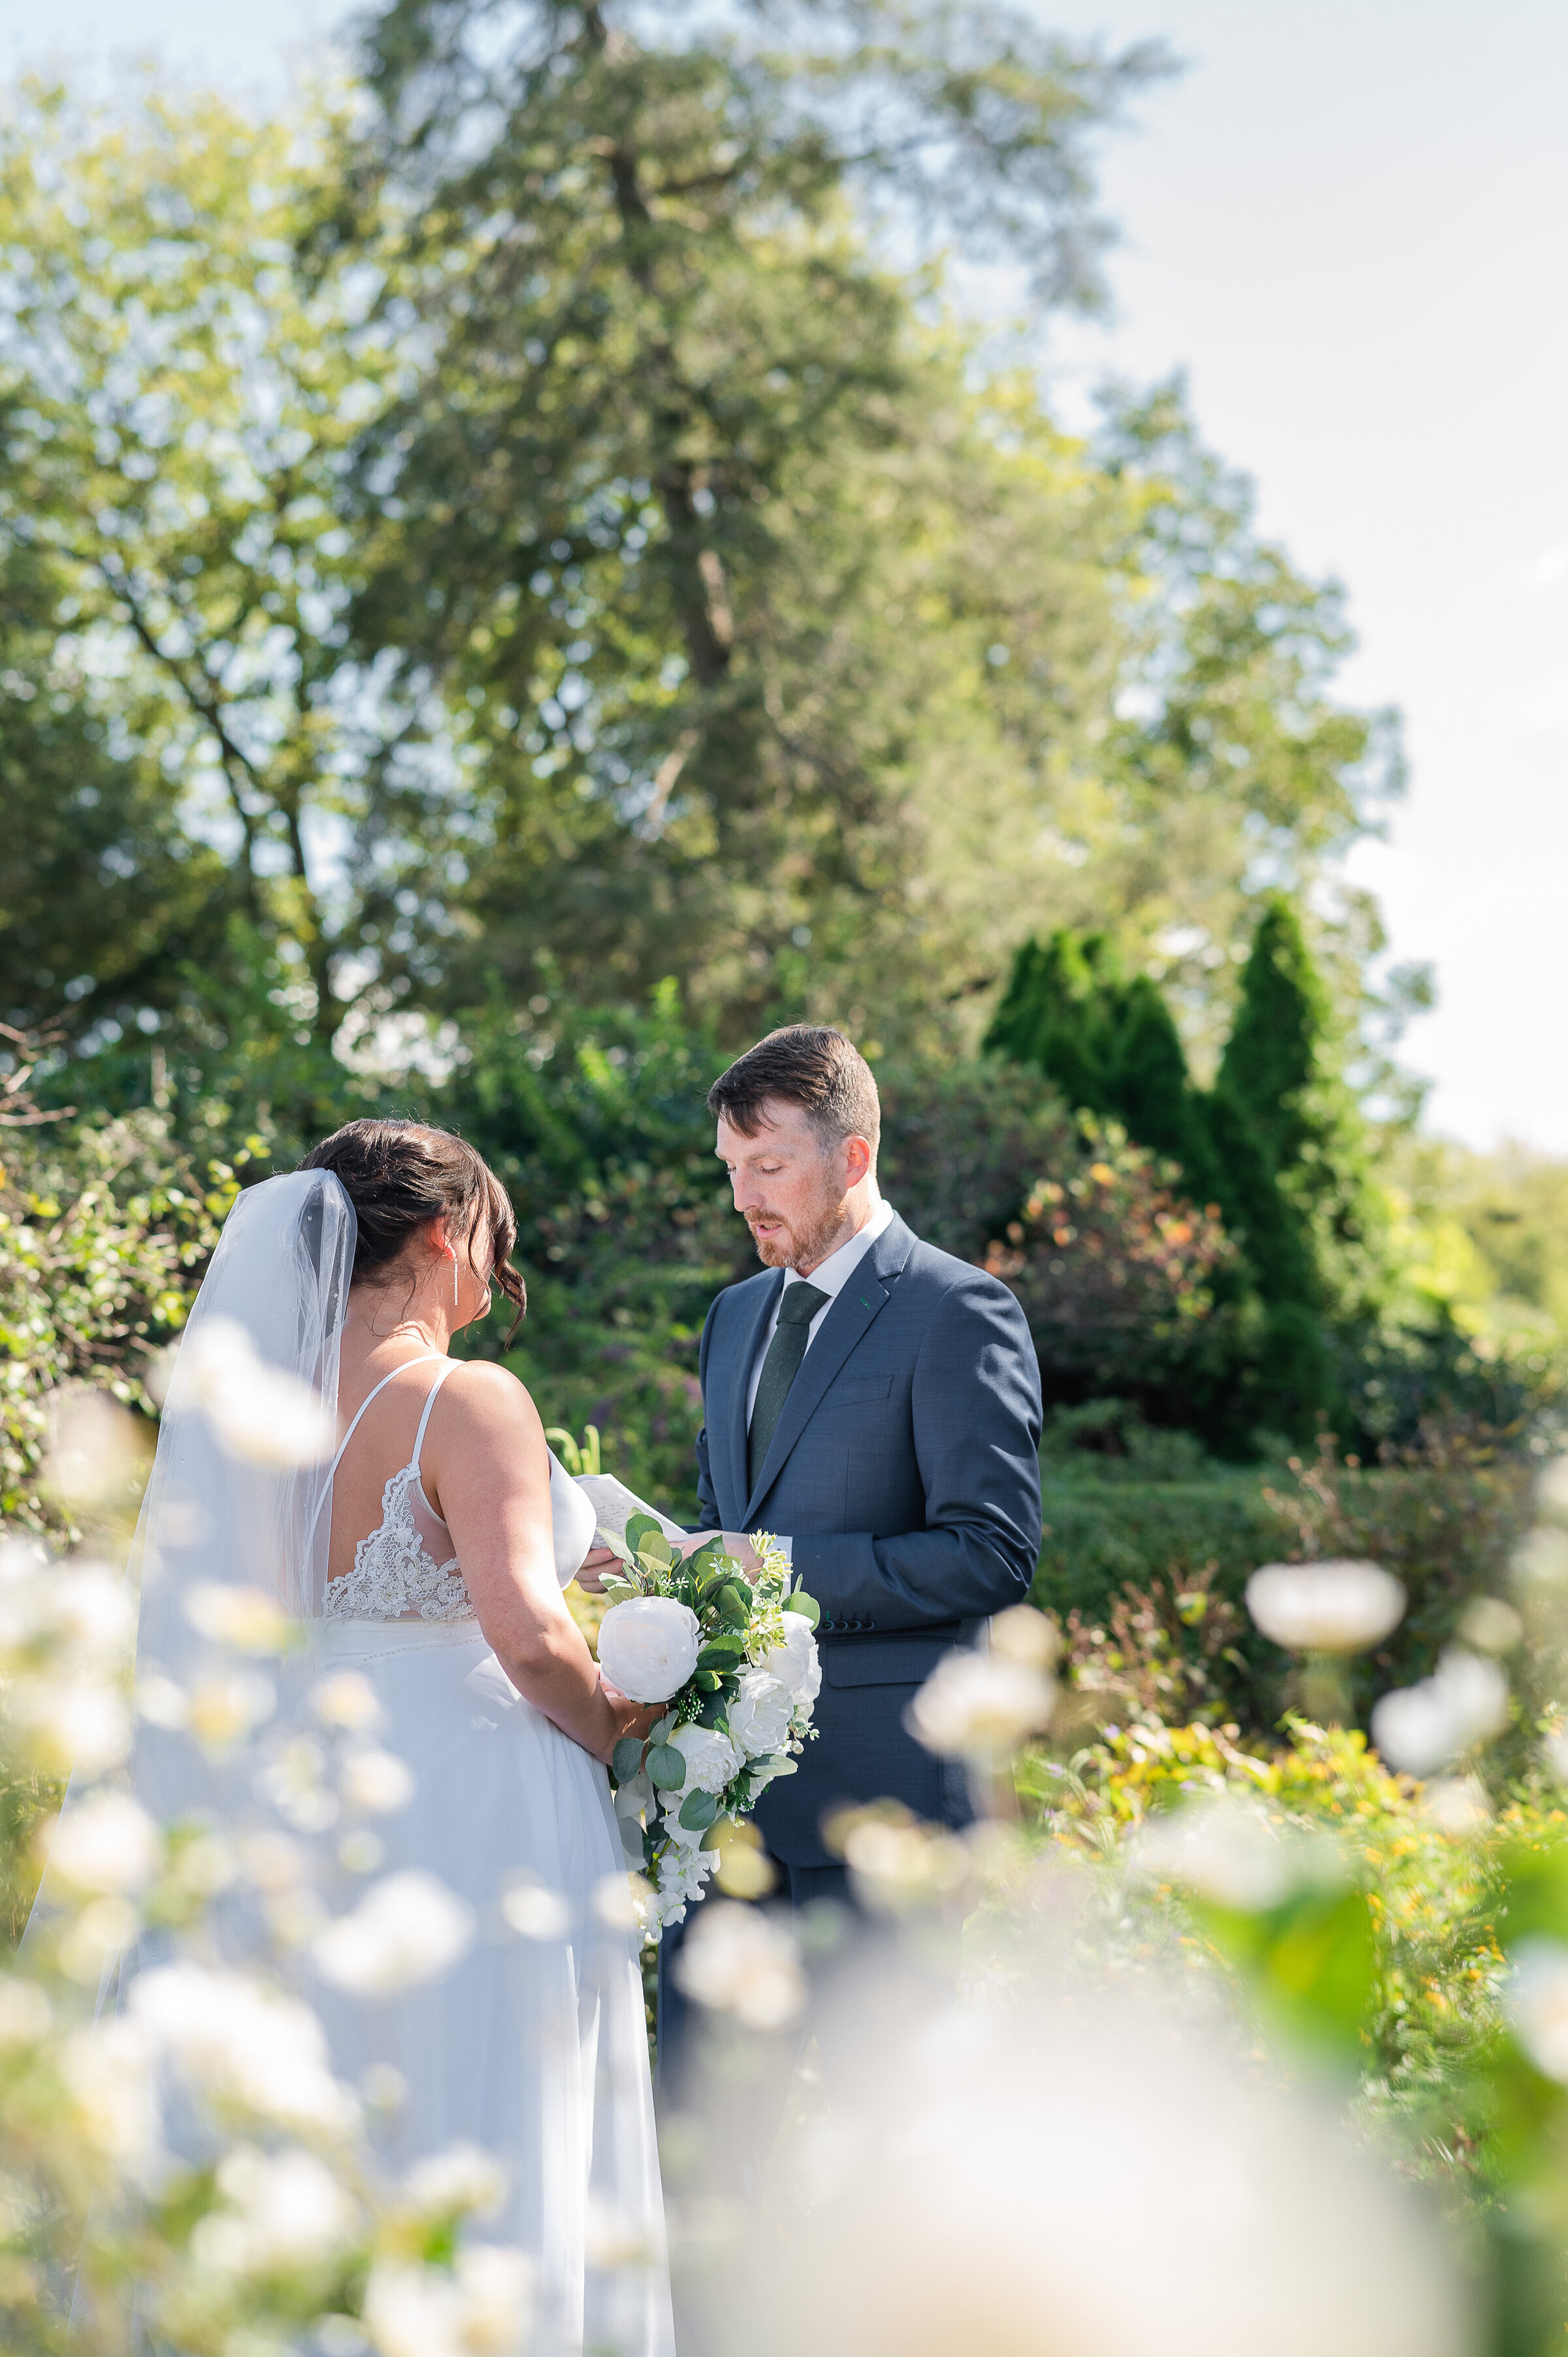 A bride and groom share a first look in a lush garden